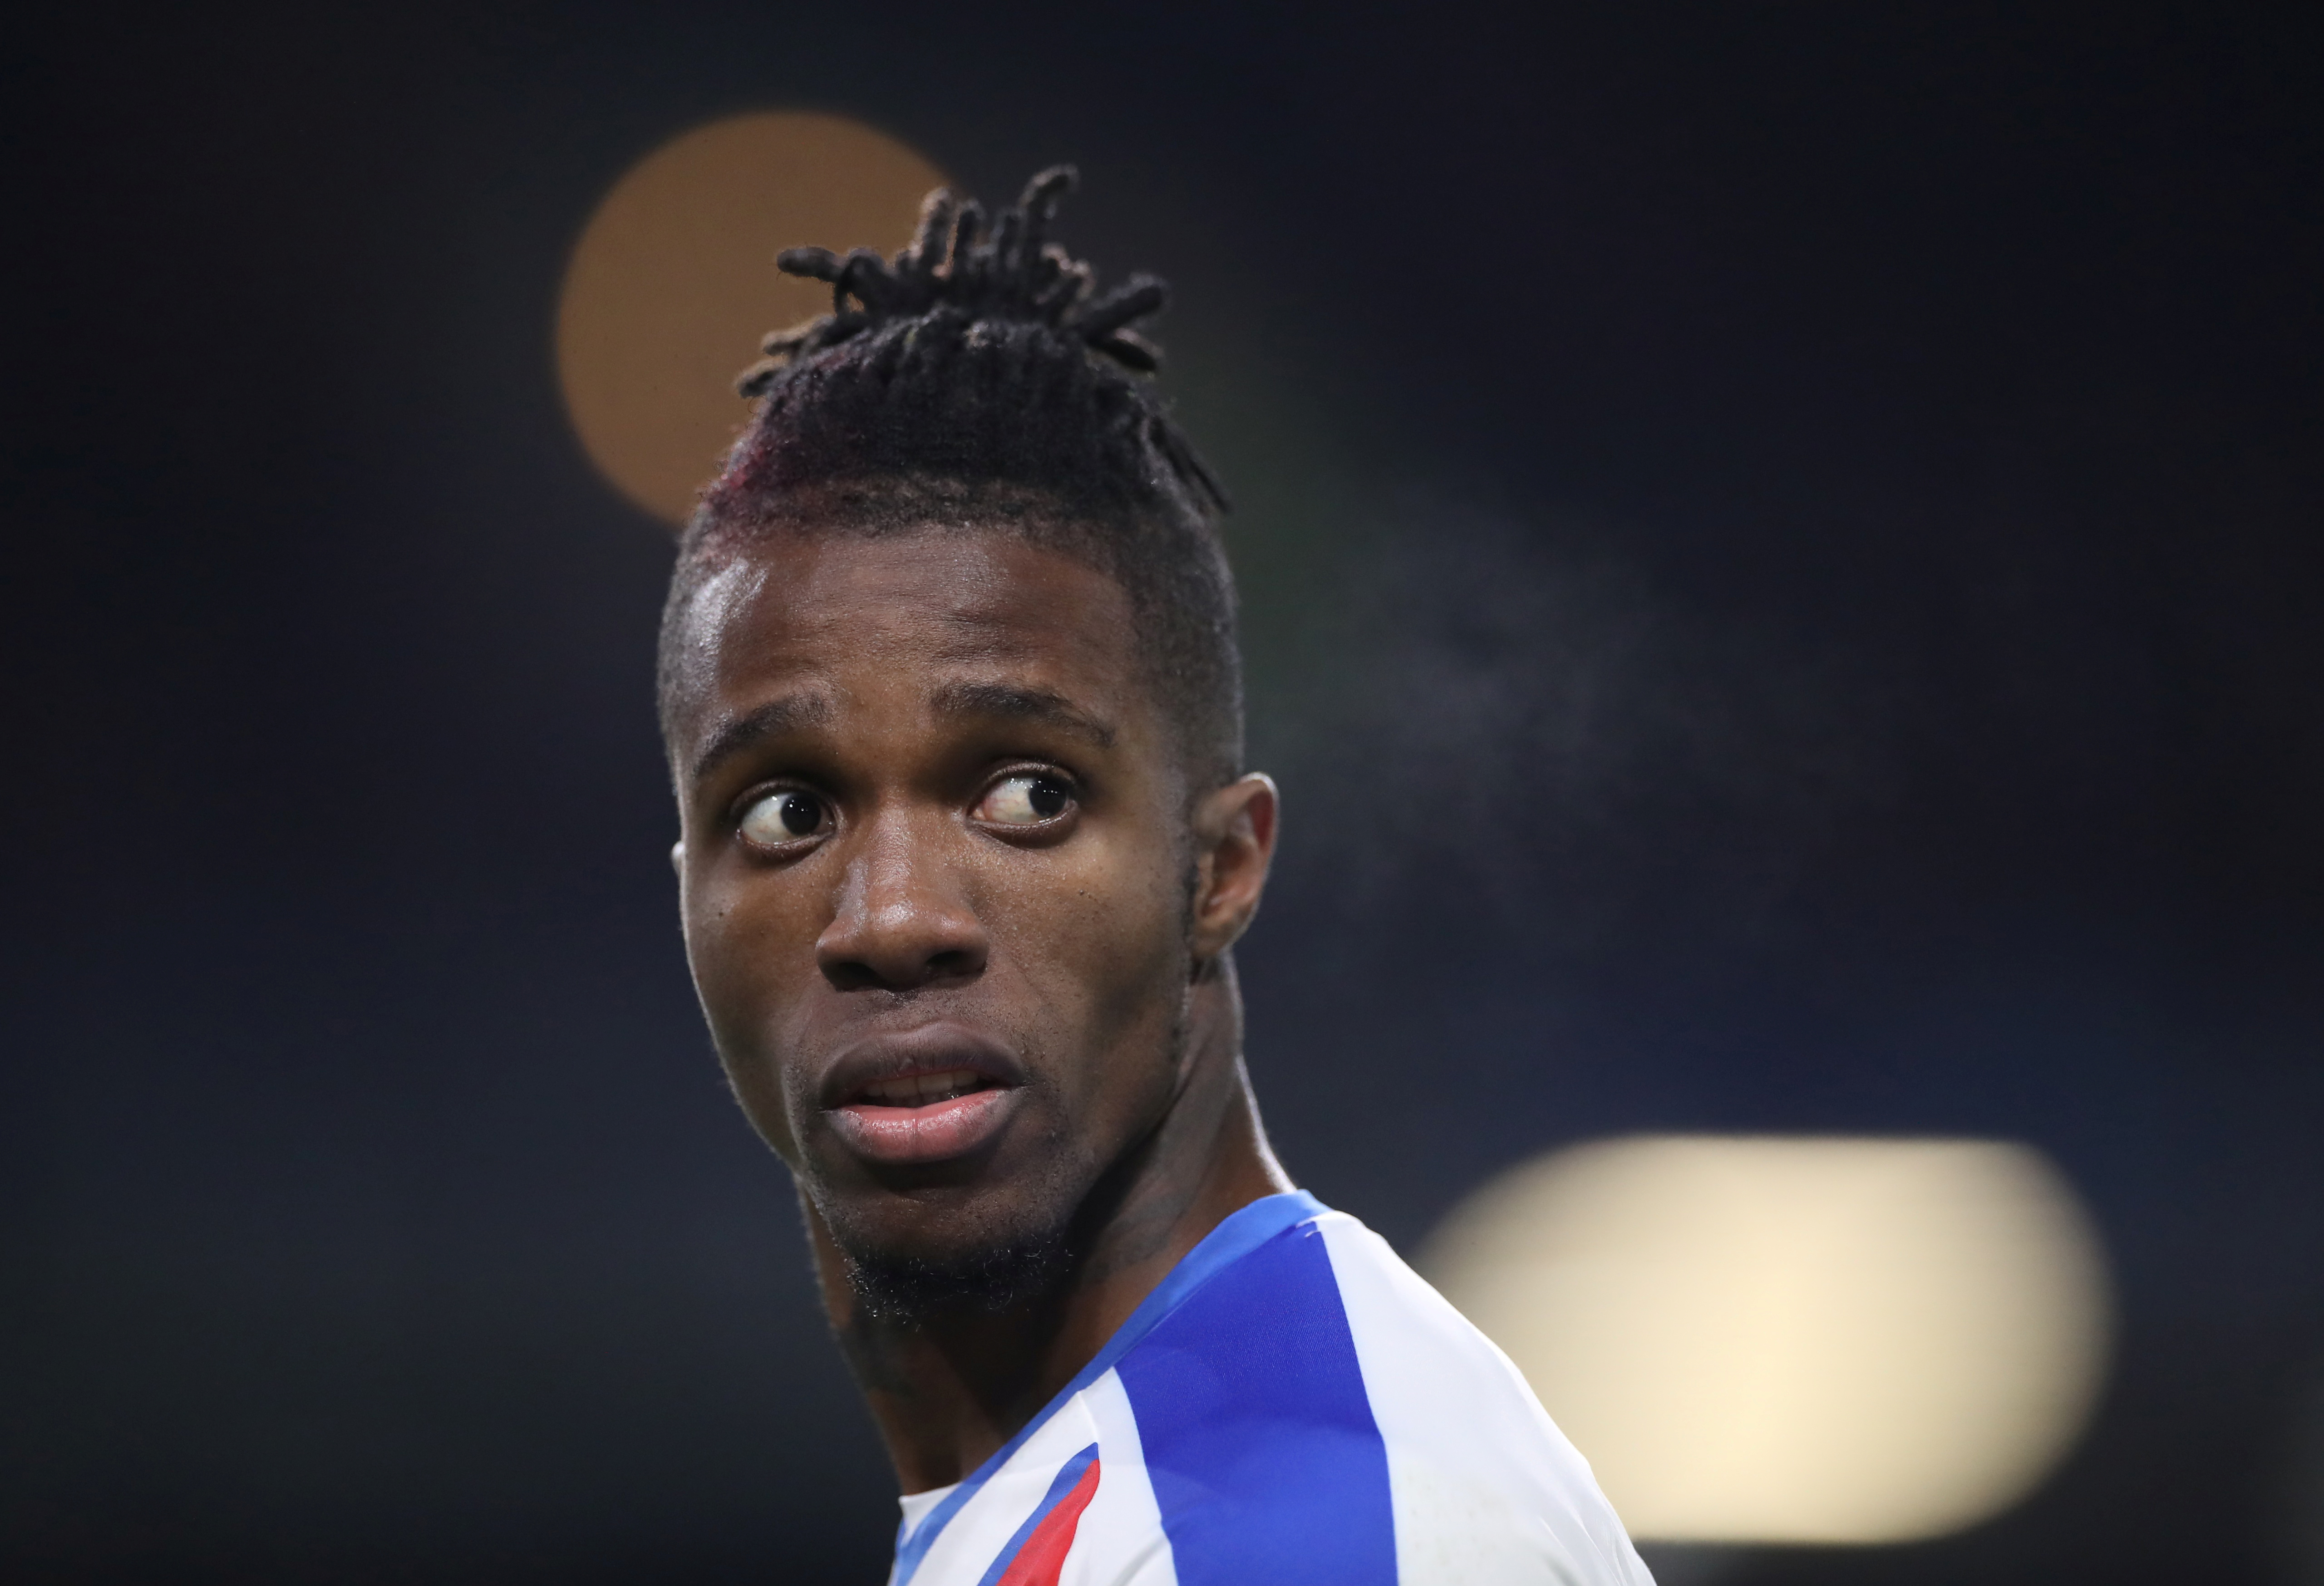 Chelsea is looking at Wilfried Zaha over Sancho this January